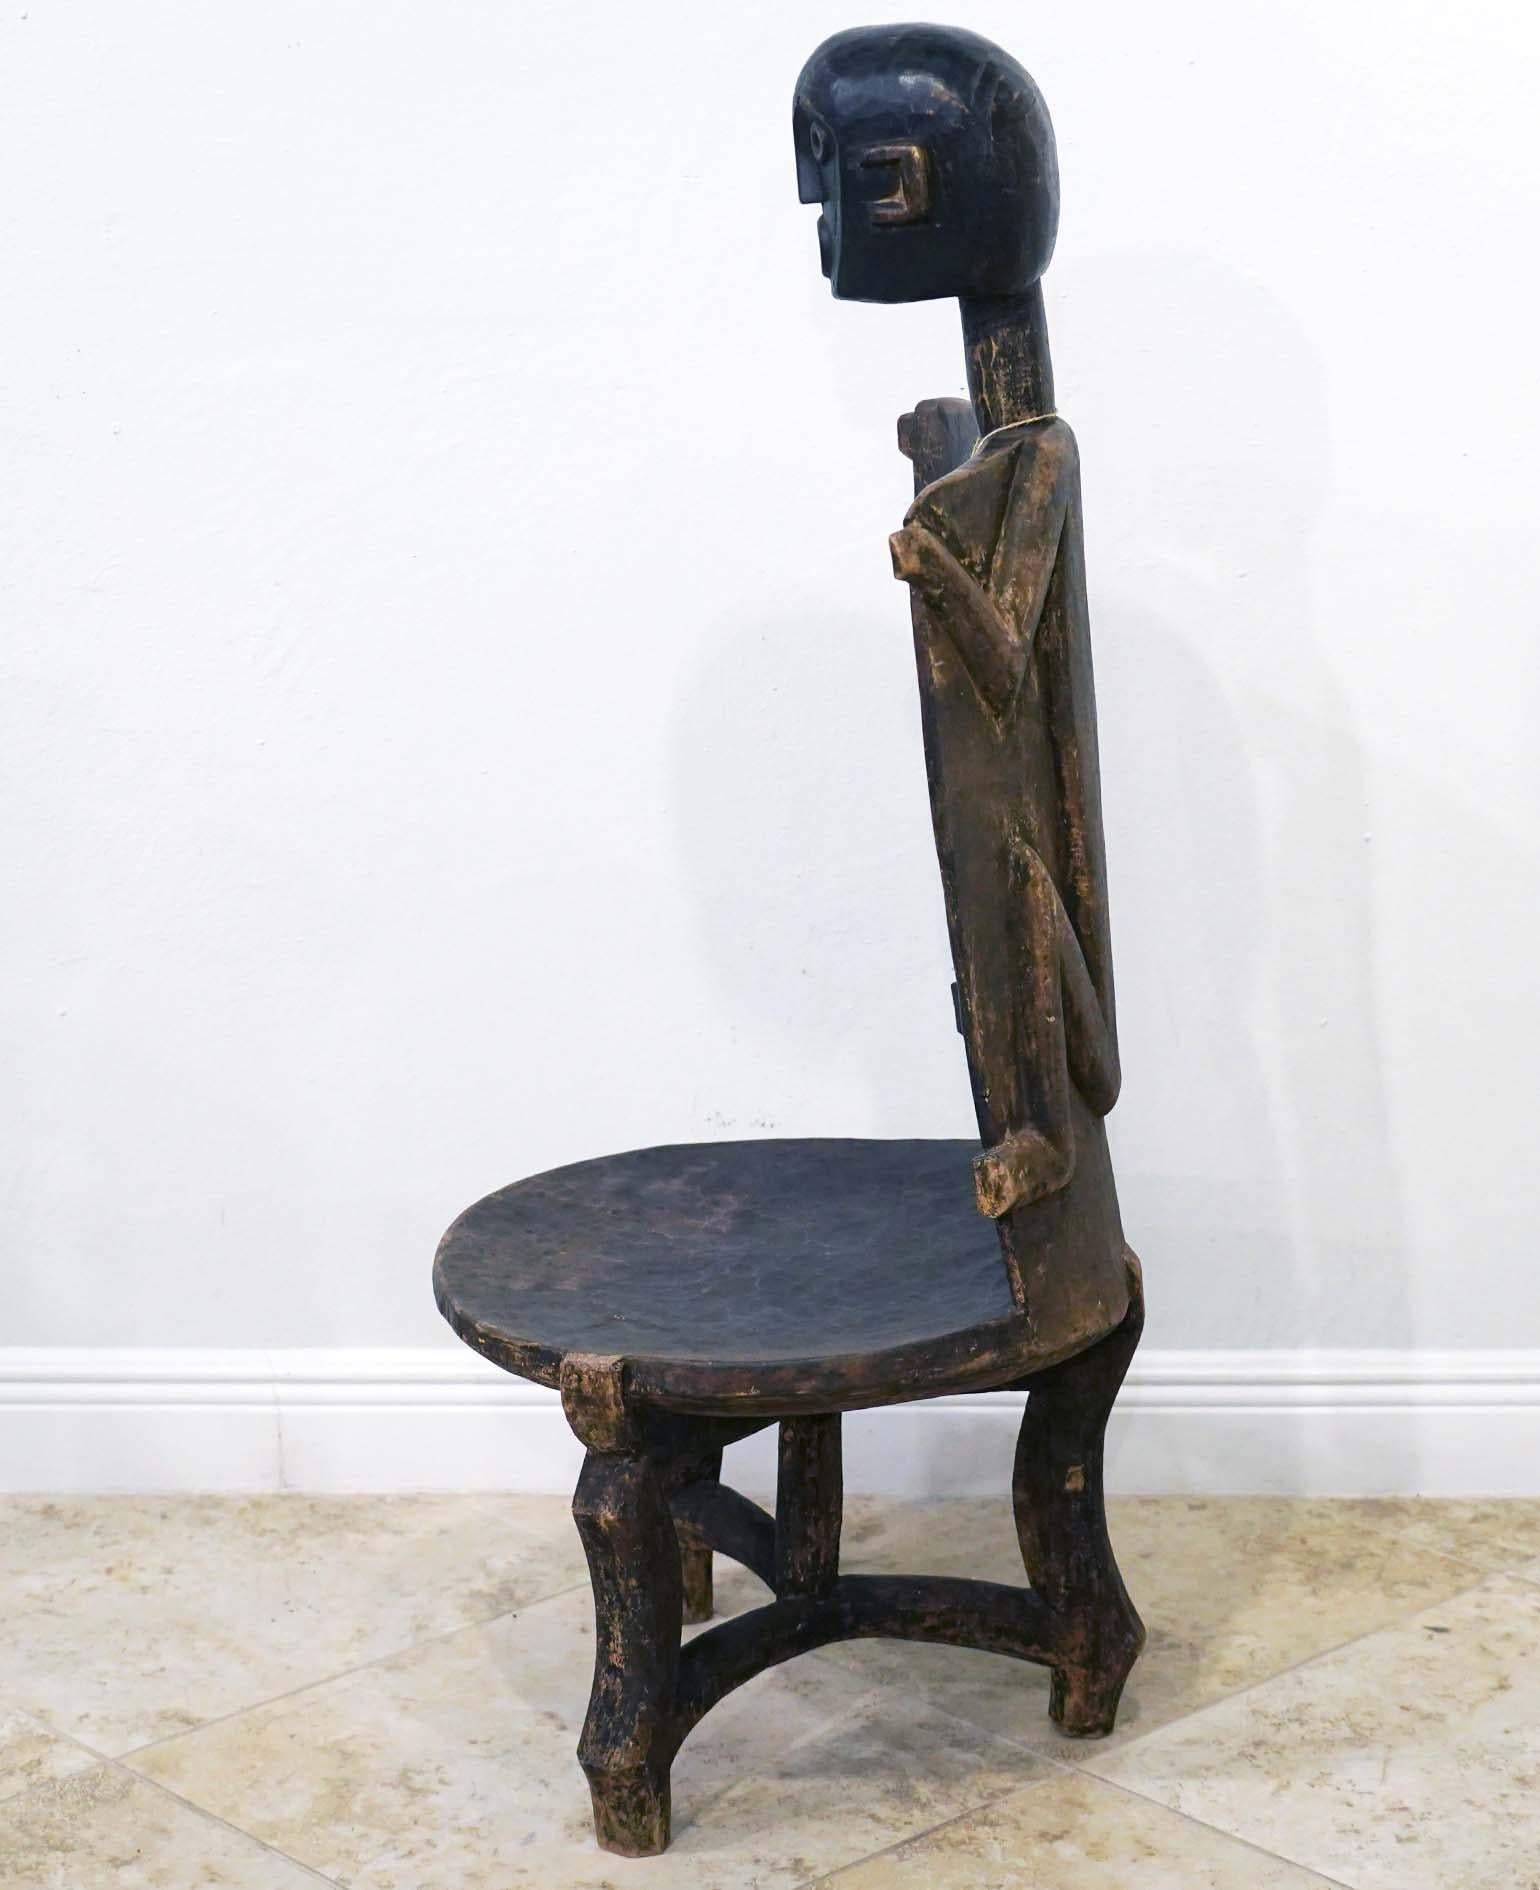 Hand-Carved Large African Figural Throne Chair by the Nyamwezi People, Tanzania 20th C.